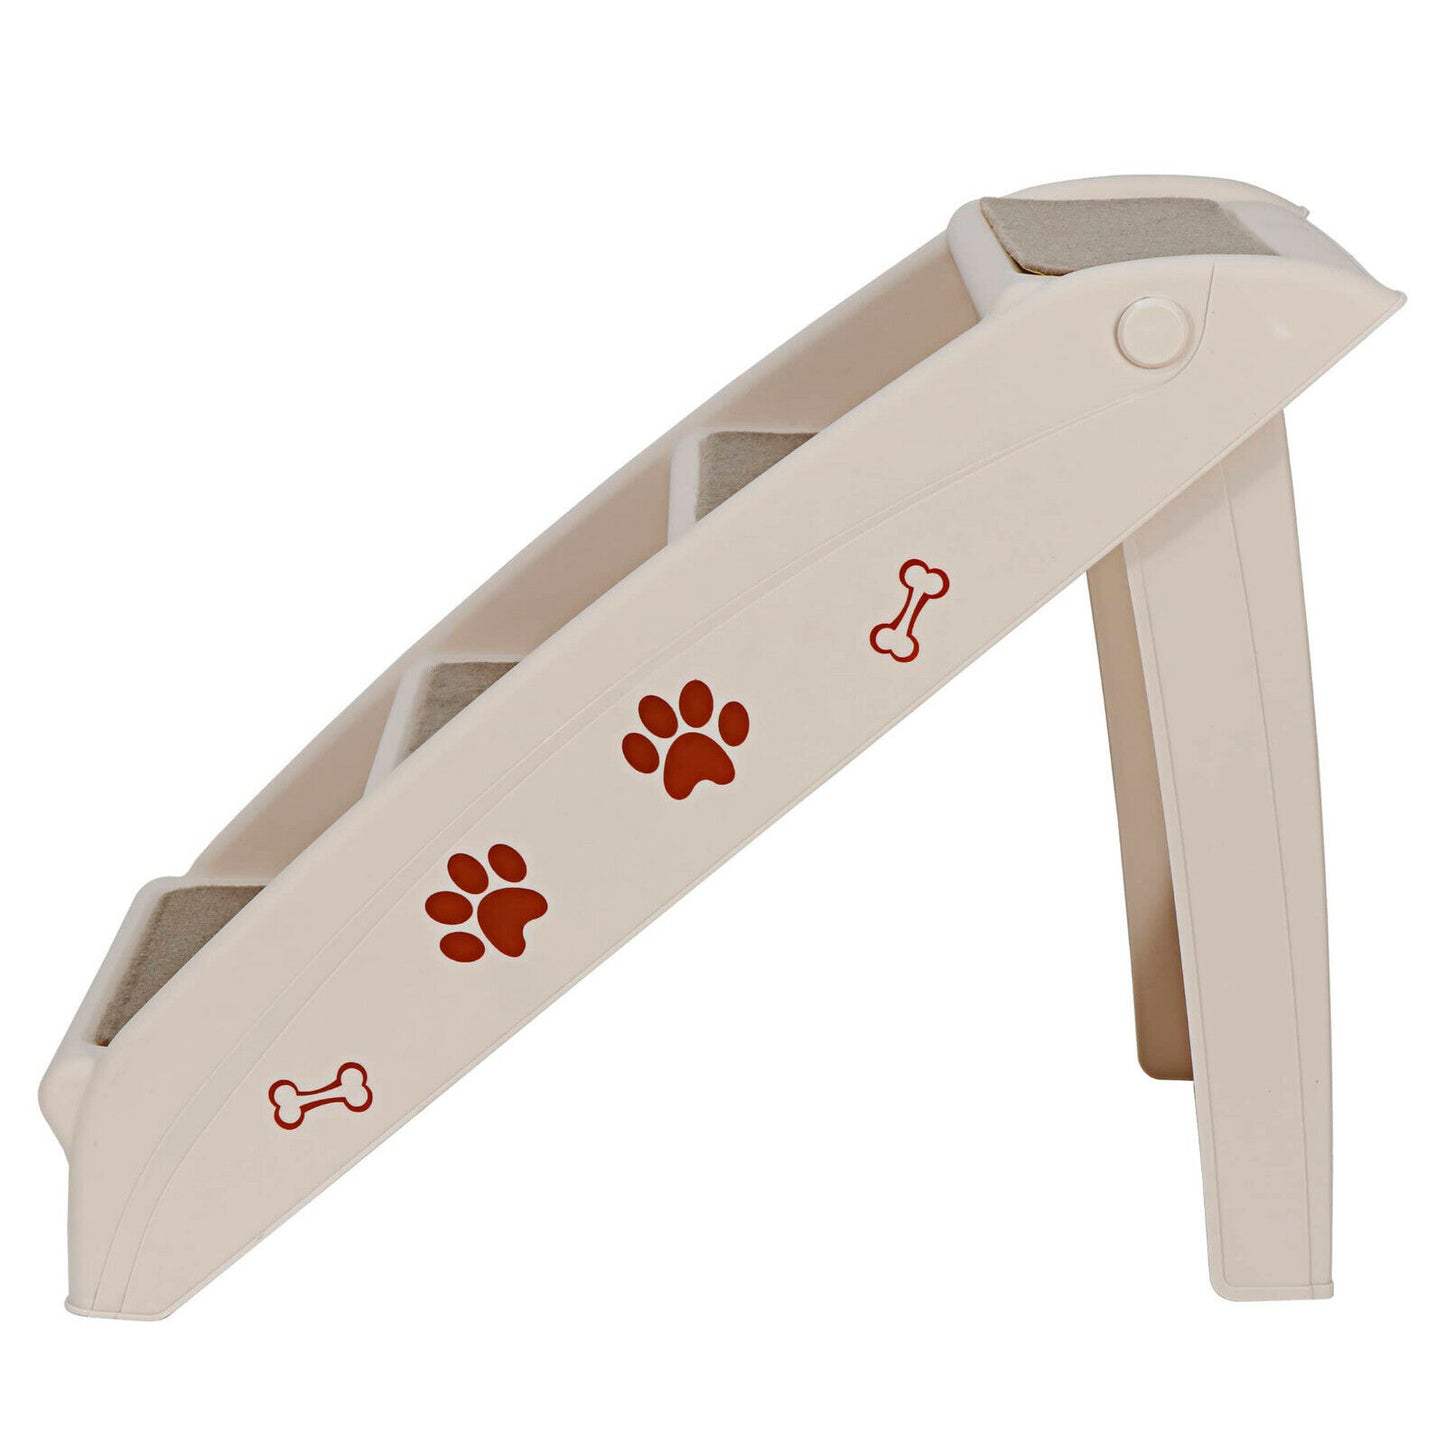 Portable Dog Steps Foldable Pet Stairs Great for Smaller Hurt Older Pets Home